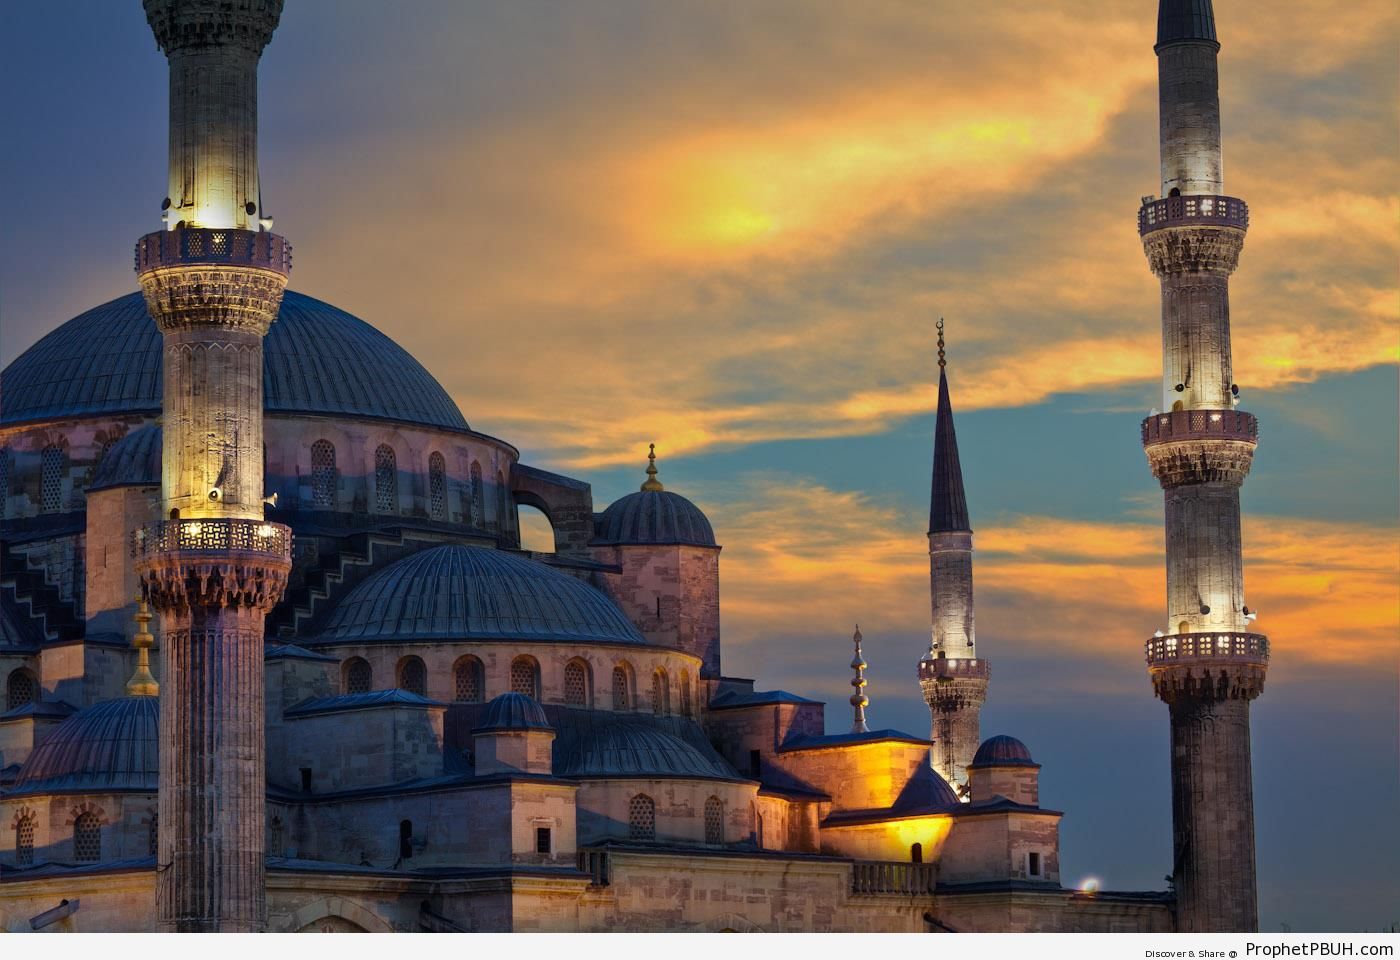 The Sultan Ahmed Blue Mosque in Istanbul, Turkey at Dusk - Islamic Architecture -Picture